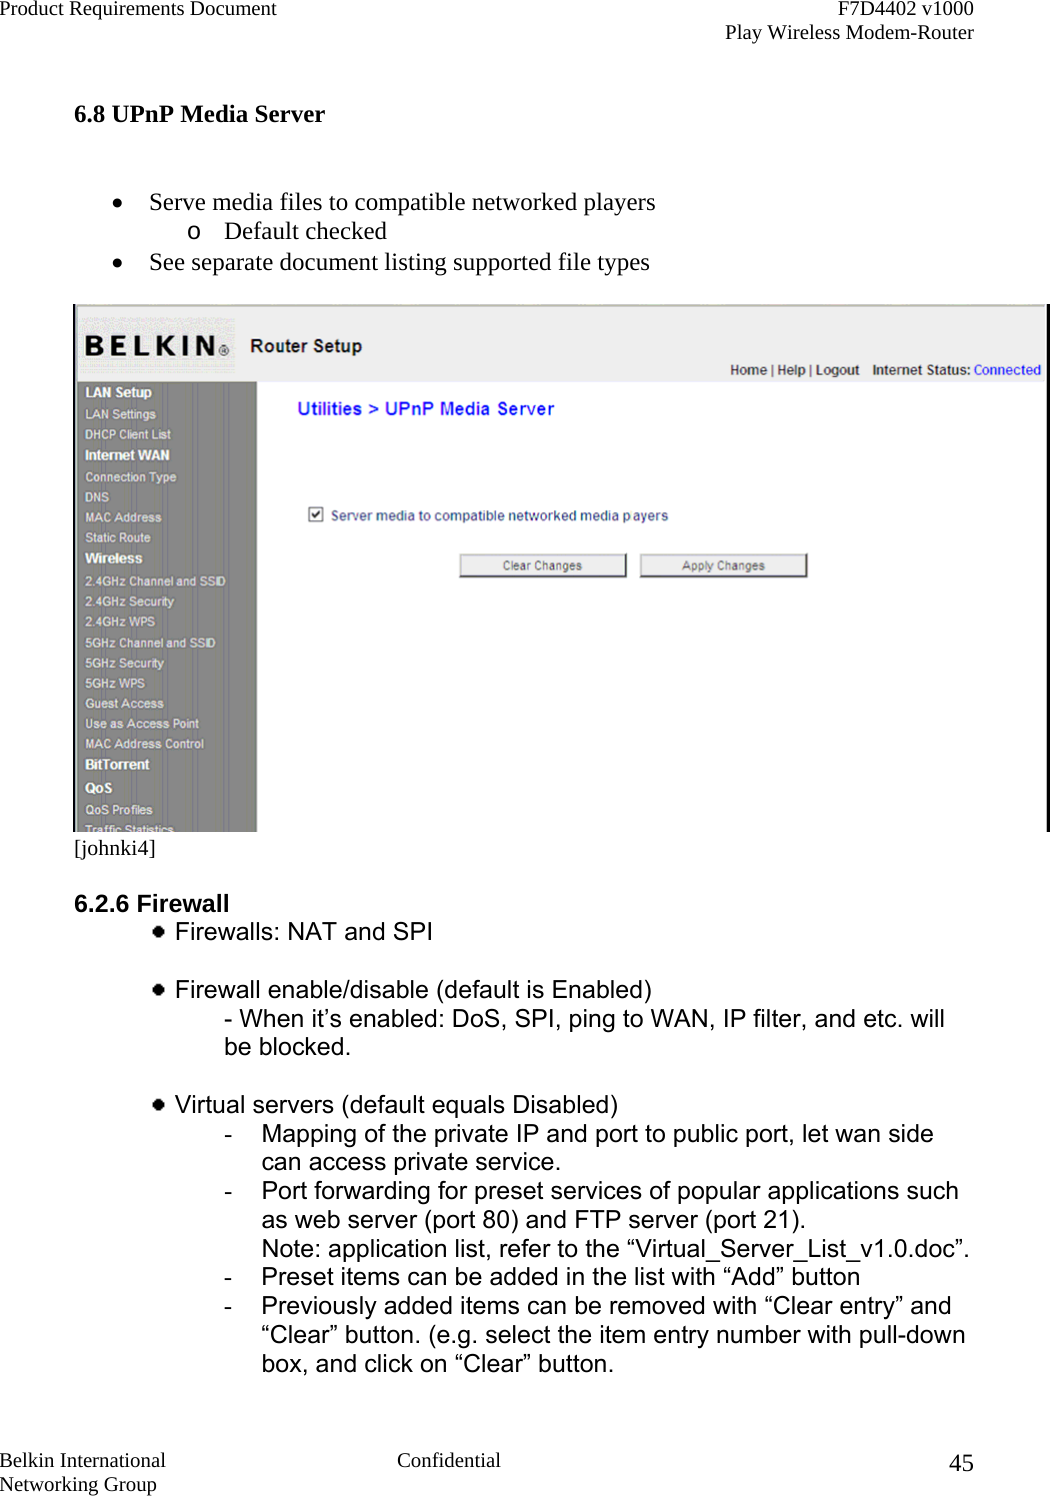 Product Requirements Document    F7D4402 v1000     Play Wireless Modem-Router  Belkin International  Confidential Networking Group 45 6.8 UPnP Media Server   •  Serve media files to compatible networked players o  Default checked •  See separate document listing supported file types  [johnki4]  6.2.6 Firewall   Firewalls: NAT and SPI    Firewall enable/disable (default is Enabled) - When it’s enabled: DoS, SPI, ping to WAN, IP filter, and etc. will be blocked.   Virtual servers (default equals Disabled)  -  Mapping of the private IP and port to public port, let wan side can access private service. -  Port forwarding for preset services of popular applications such as web server (port 80) and FTP server (port 21). Note: application list, refer to the “Virtual_Server_List_v1.0.doc”. -  Preset items can be added in the list with “Add” button -  Previously added items can be removed with “Clear entry” and “Clear” button. (e.g. select the item entry number with pull-down box, and click on “Clear” button. 